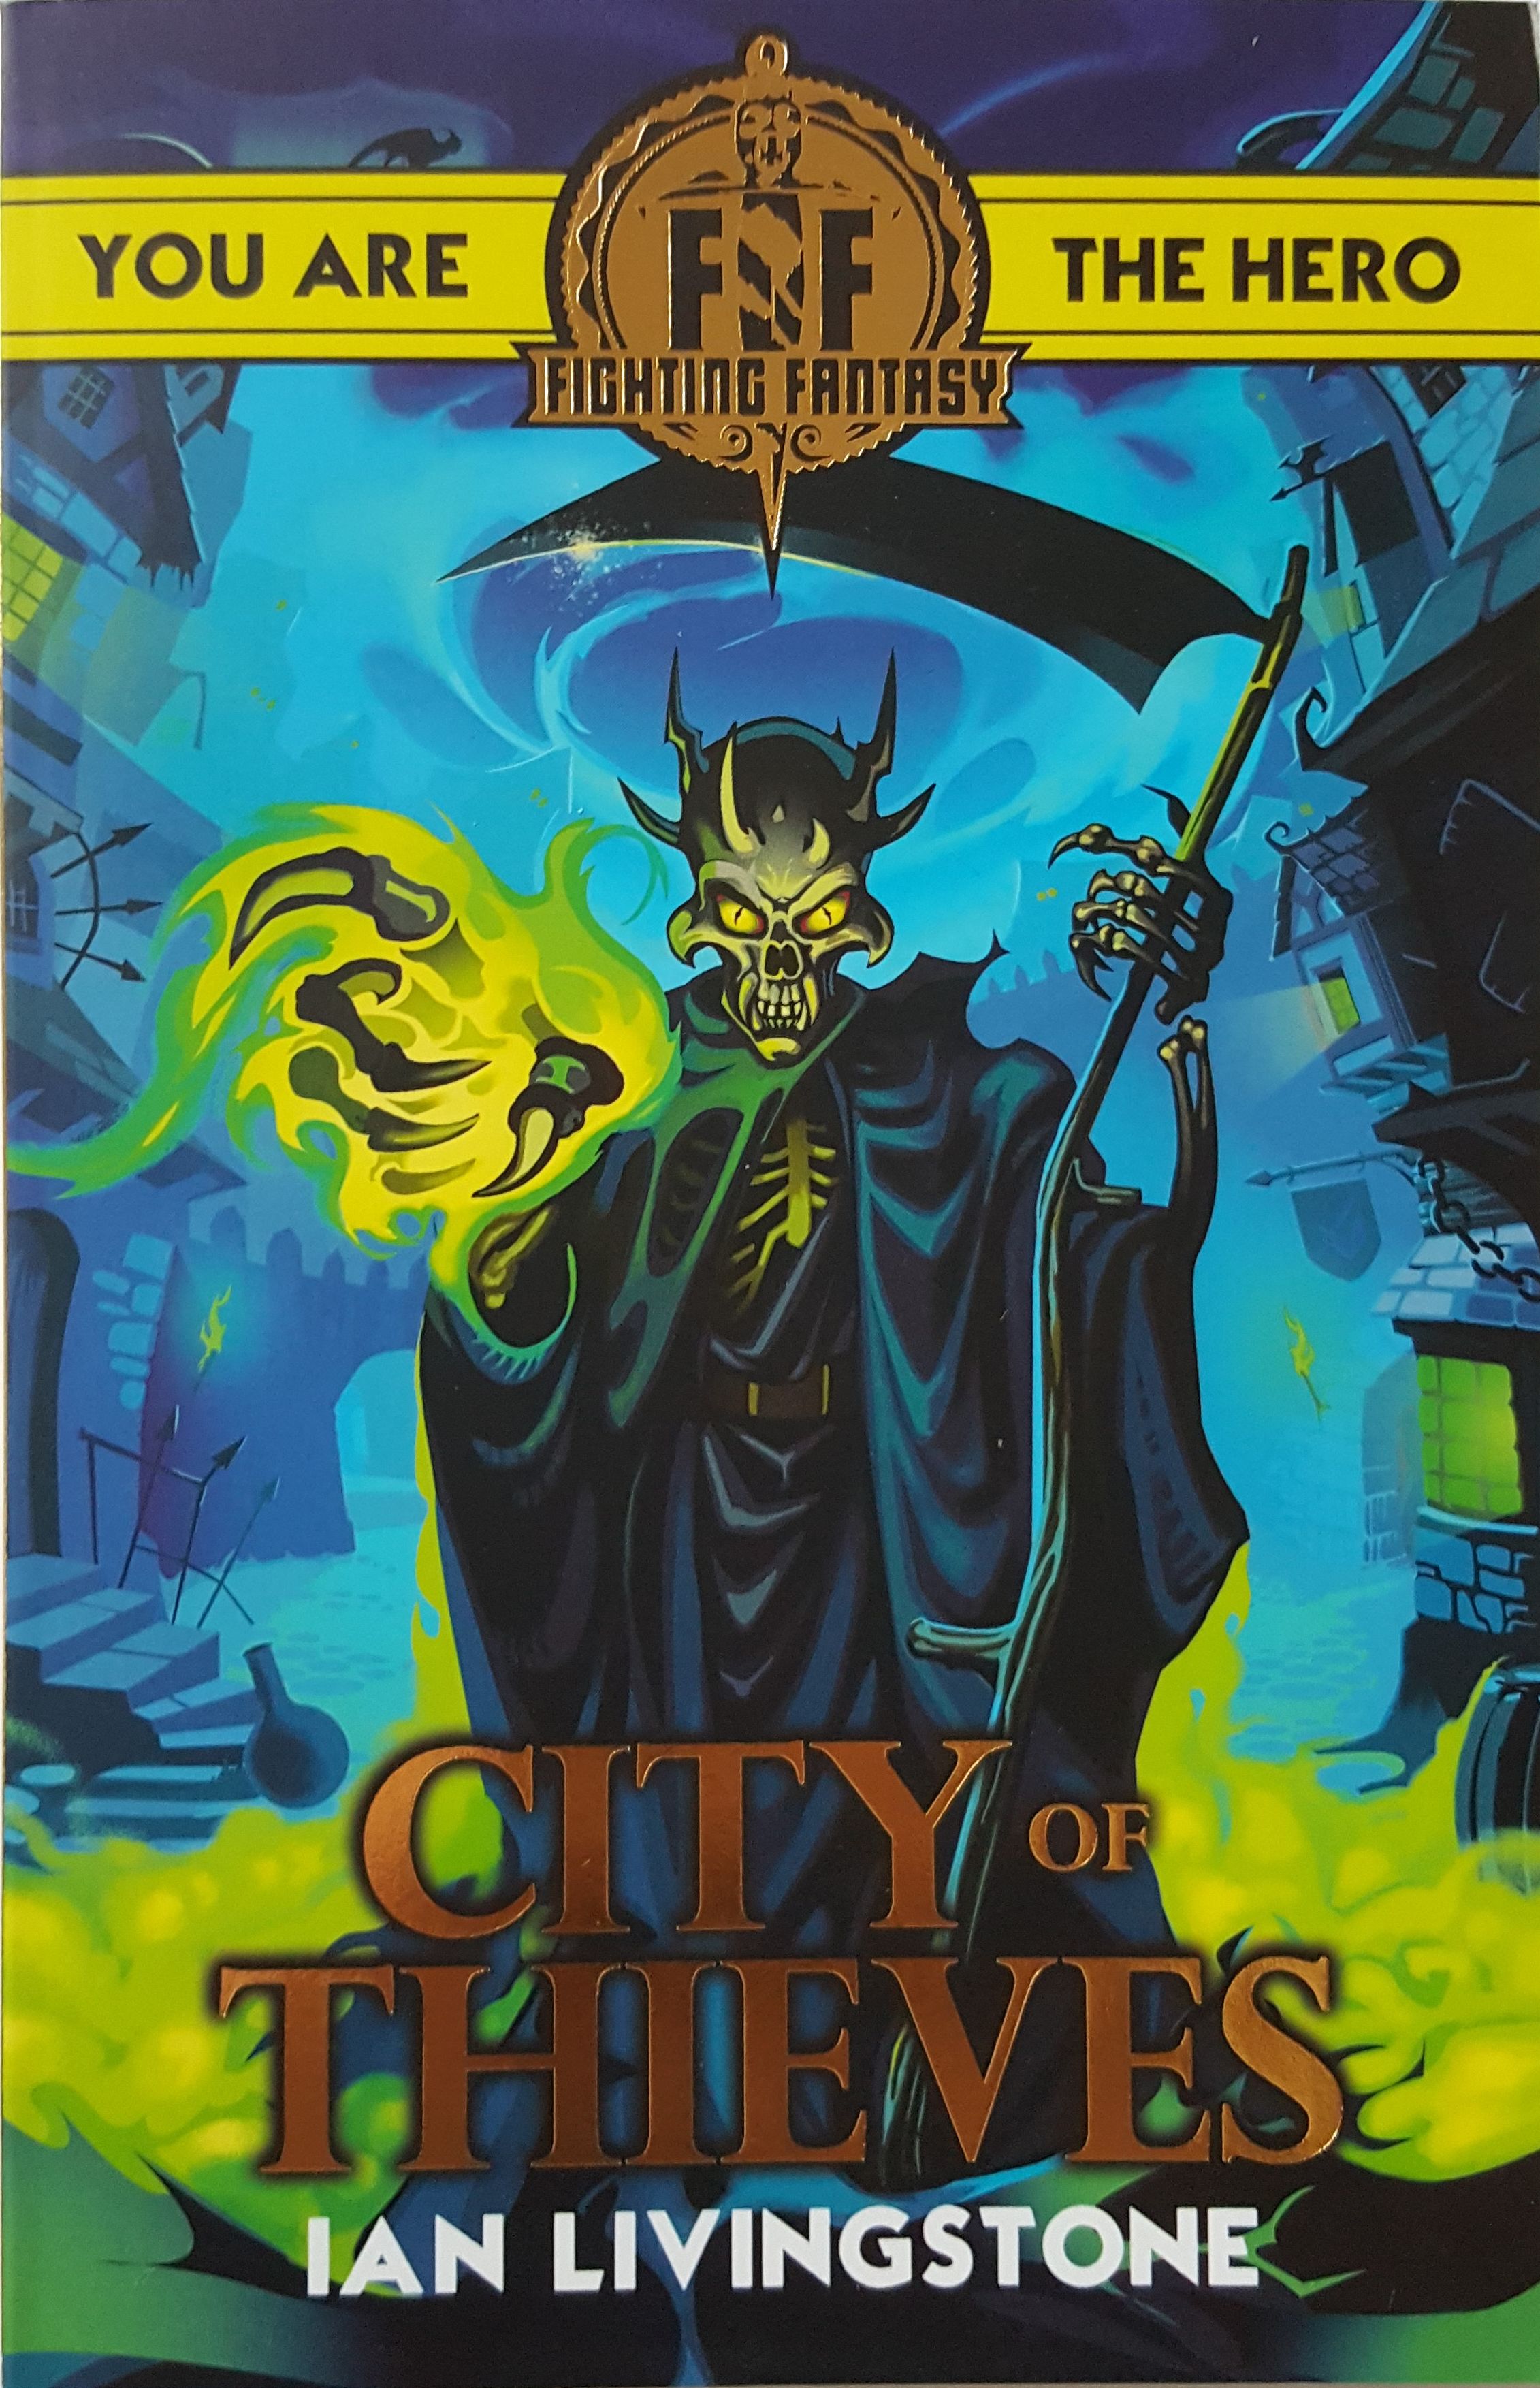 Item - City of Thieves - Demian's Gamebook Web Page